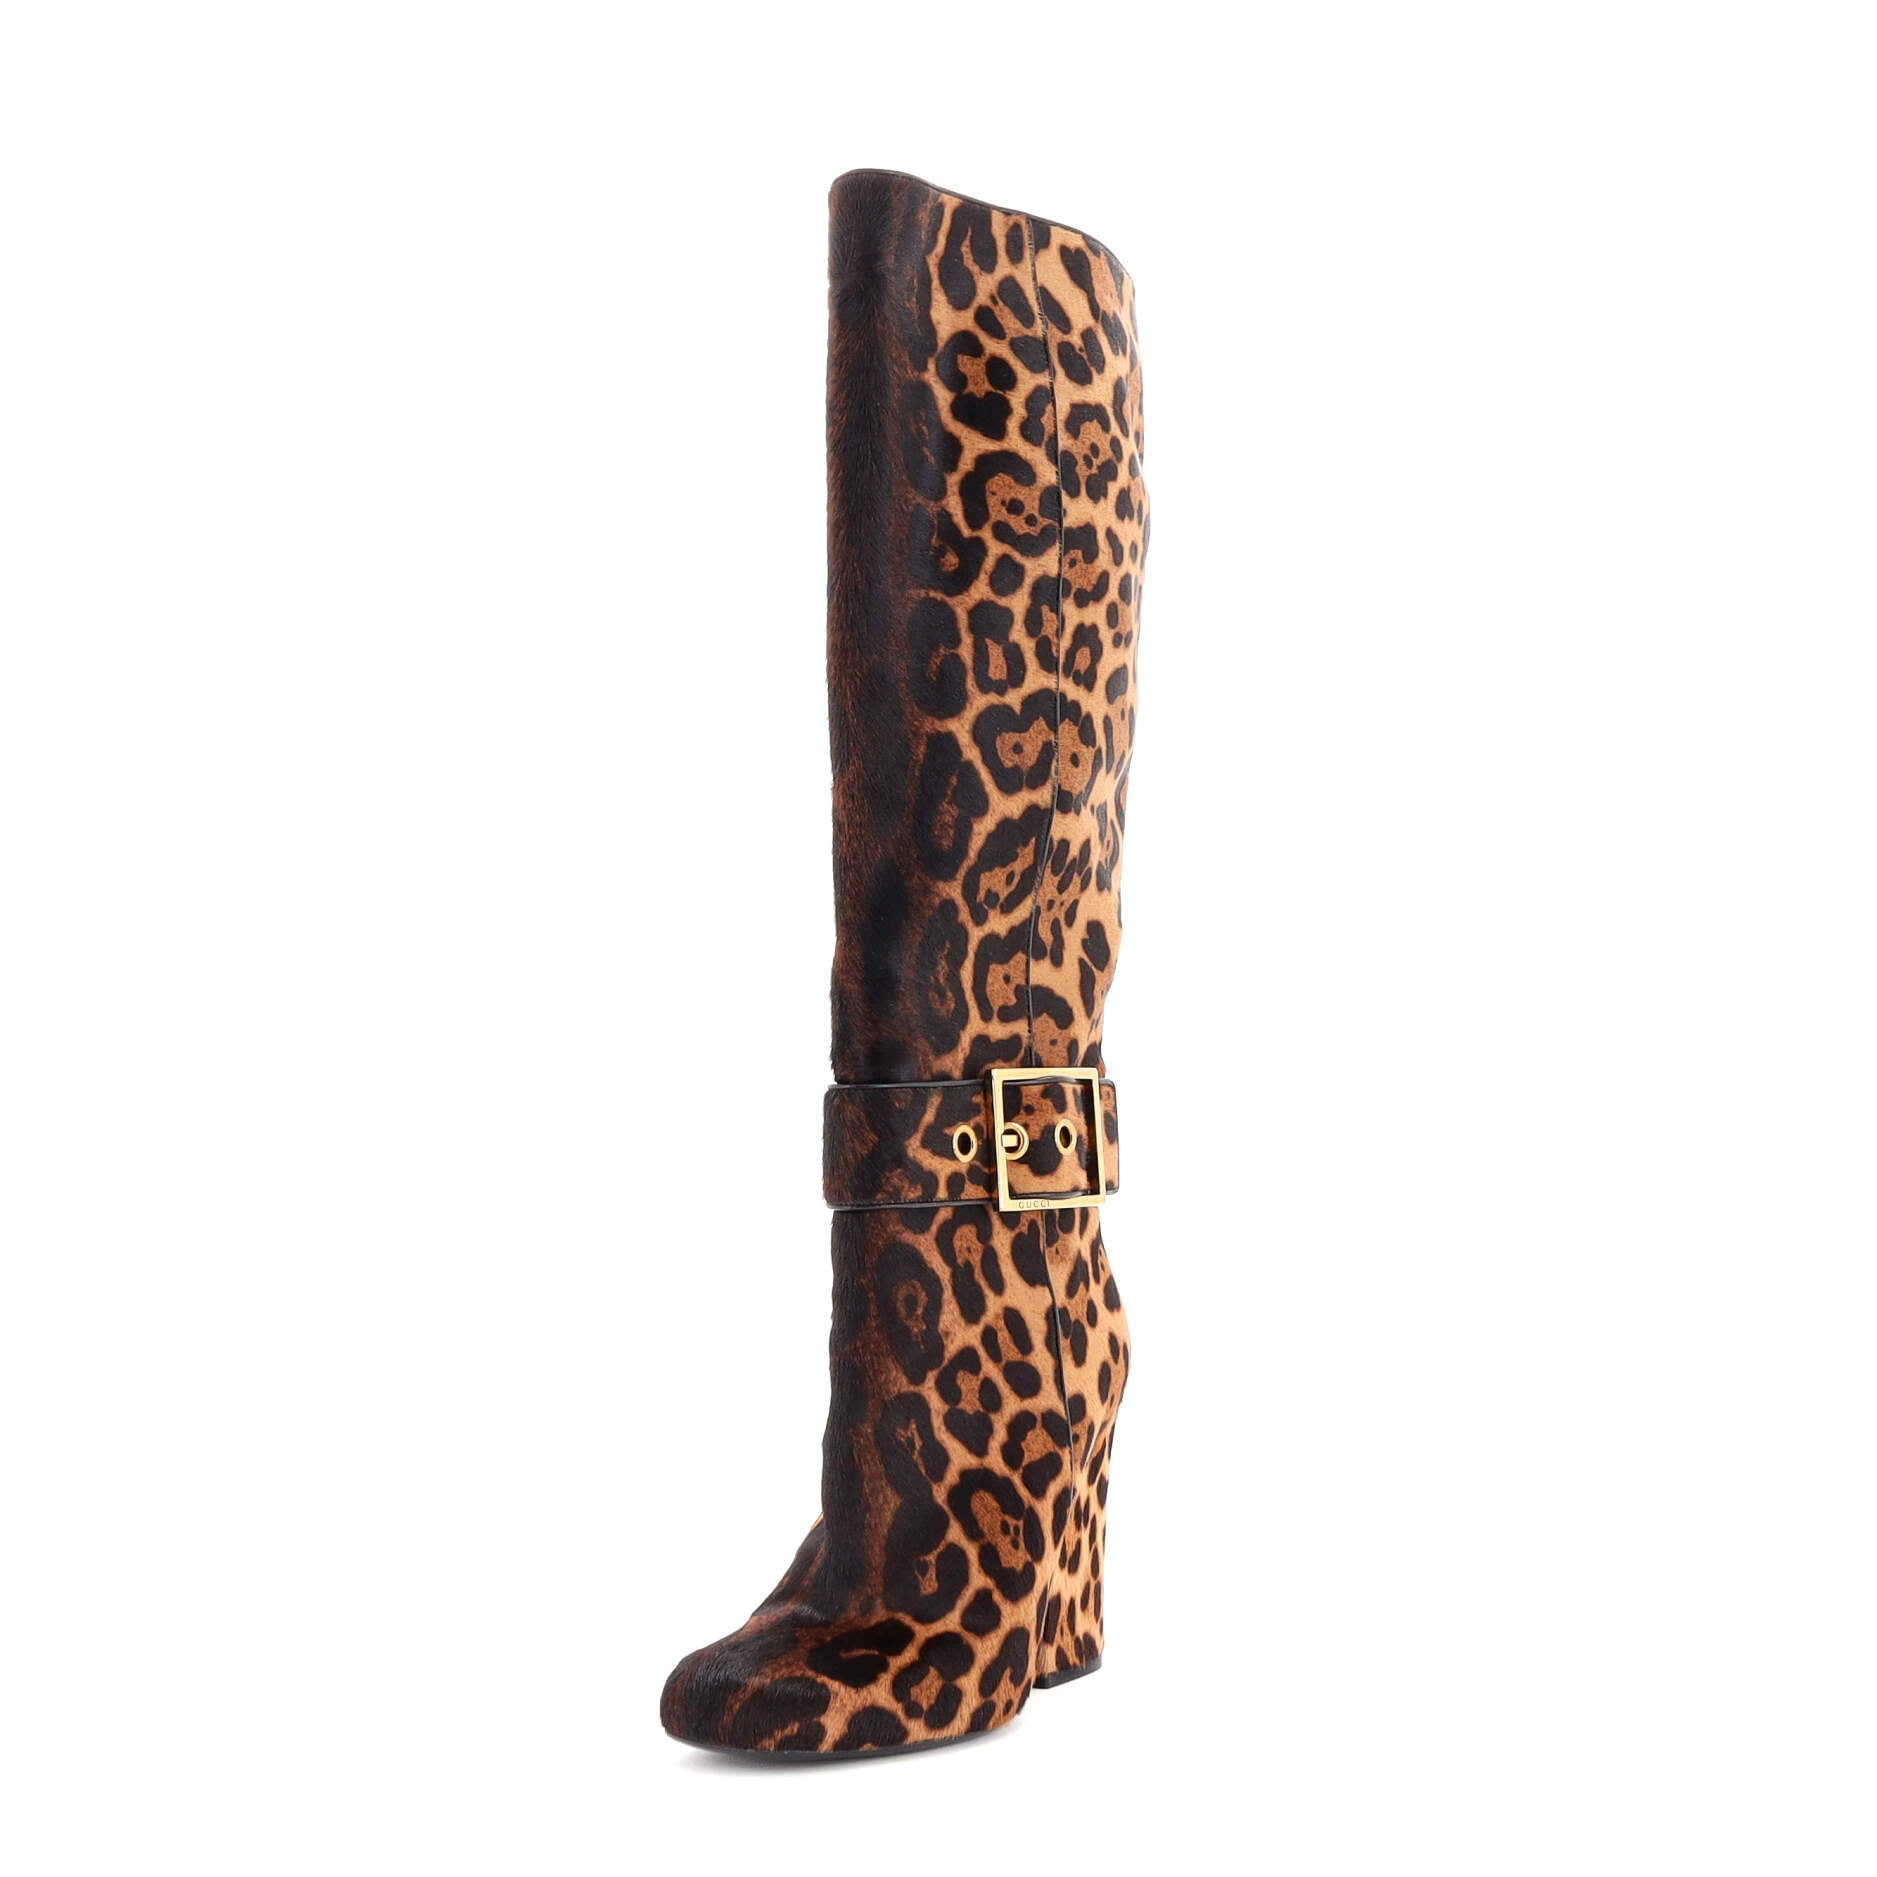 Women's Buckle Knee High Boots Printed Pony Hair